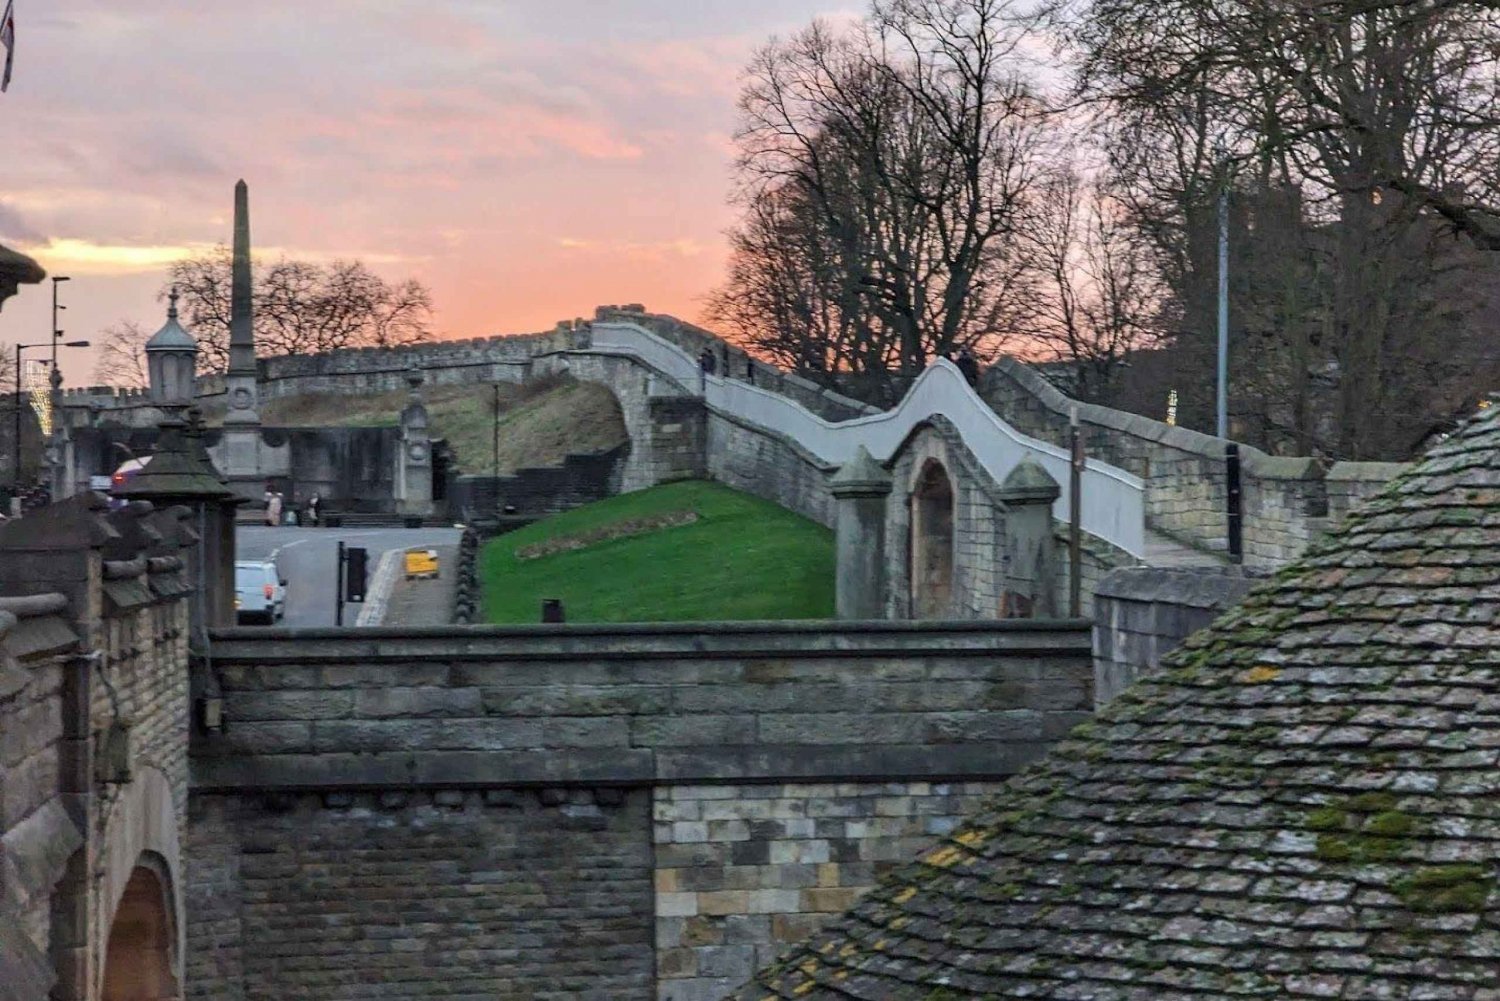 Discover York's Legacy: In-App Audio Tour of the City Walls